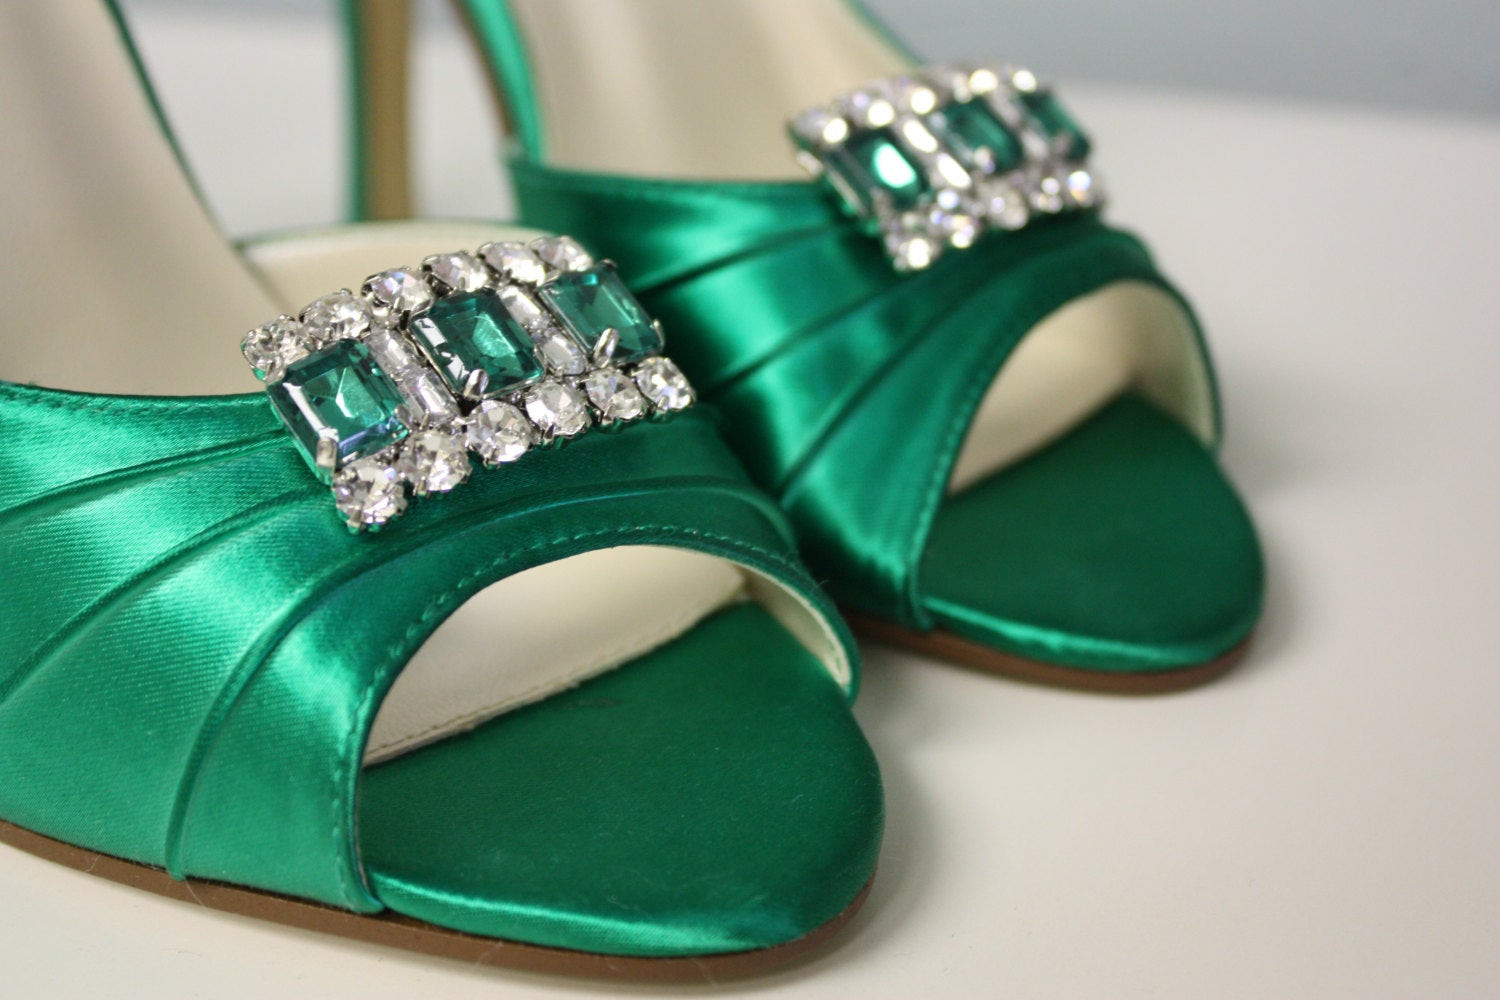 Emerald Green Wedding Shoes
 Unavailable Listing on Etsy